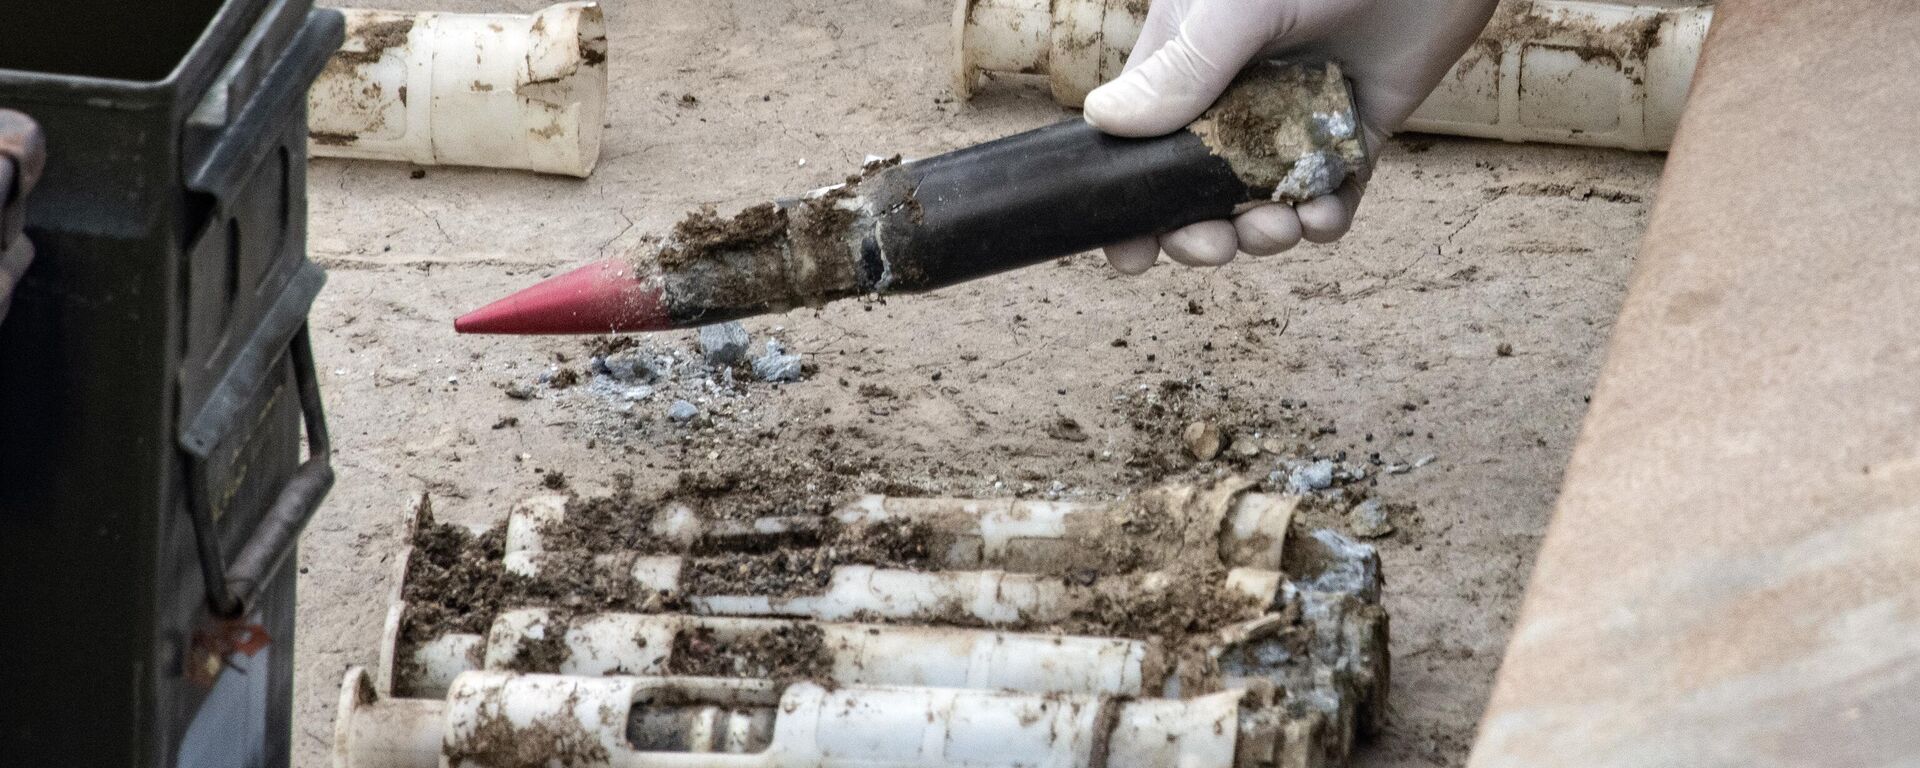 In this image provided by the U.S. Air National Guard, U.S. Air Force National Guard Explosive Ordnance Disposal Techinicians prepare several contaminated and compromised depleted uranium rounds on June 23, 2022 at Tooele Army Depot, Utah - Sputnik International, 1920, 13.06.2023